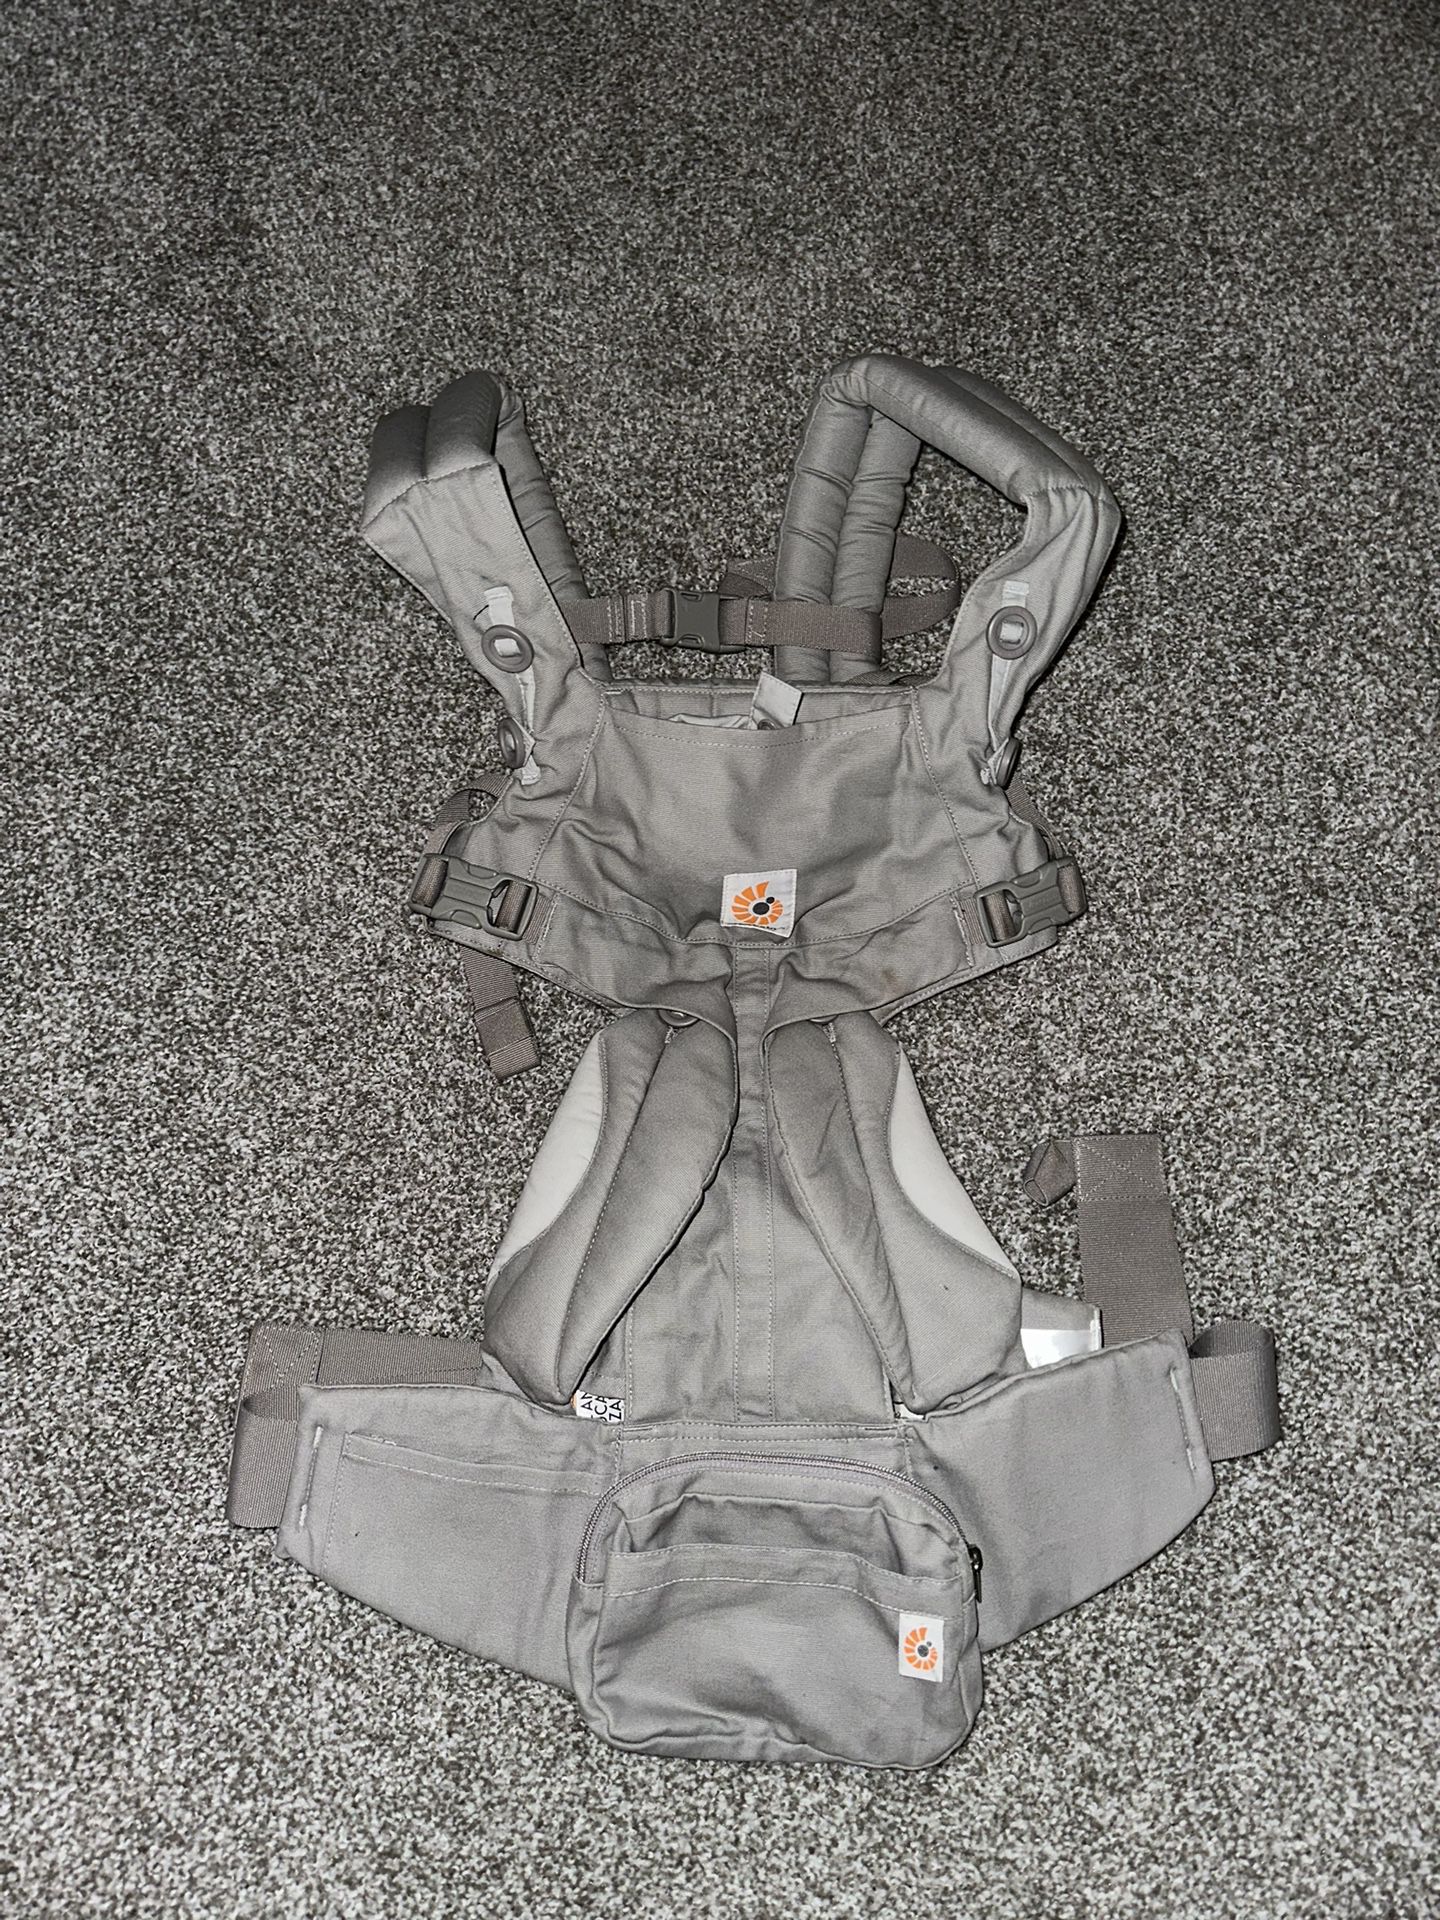 Ergobaby OMNI 360 Carrier in pearl gray (7-45 lbs).